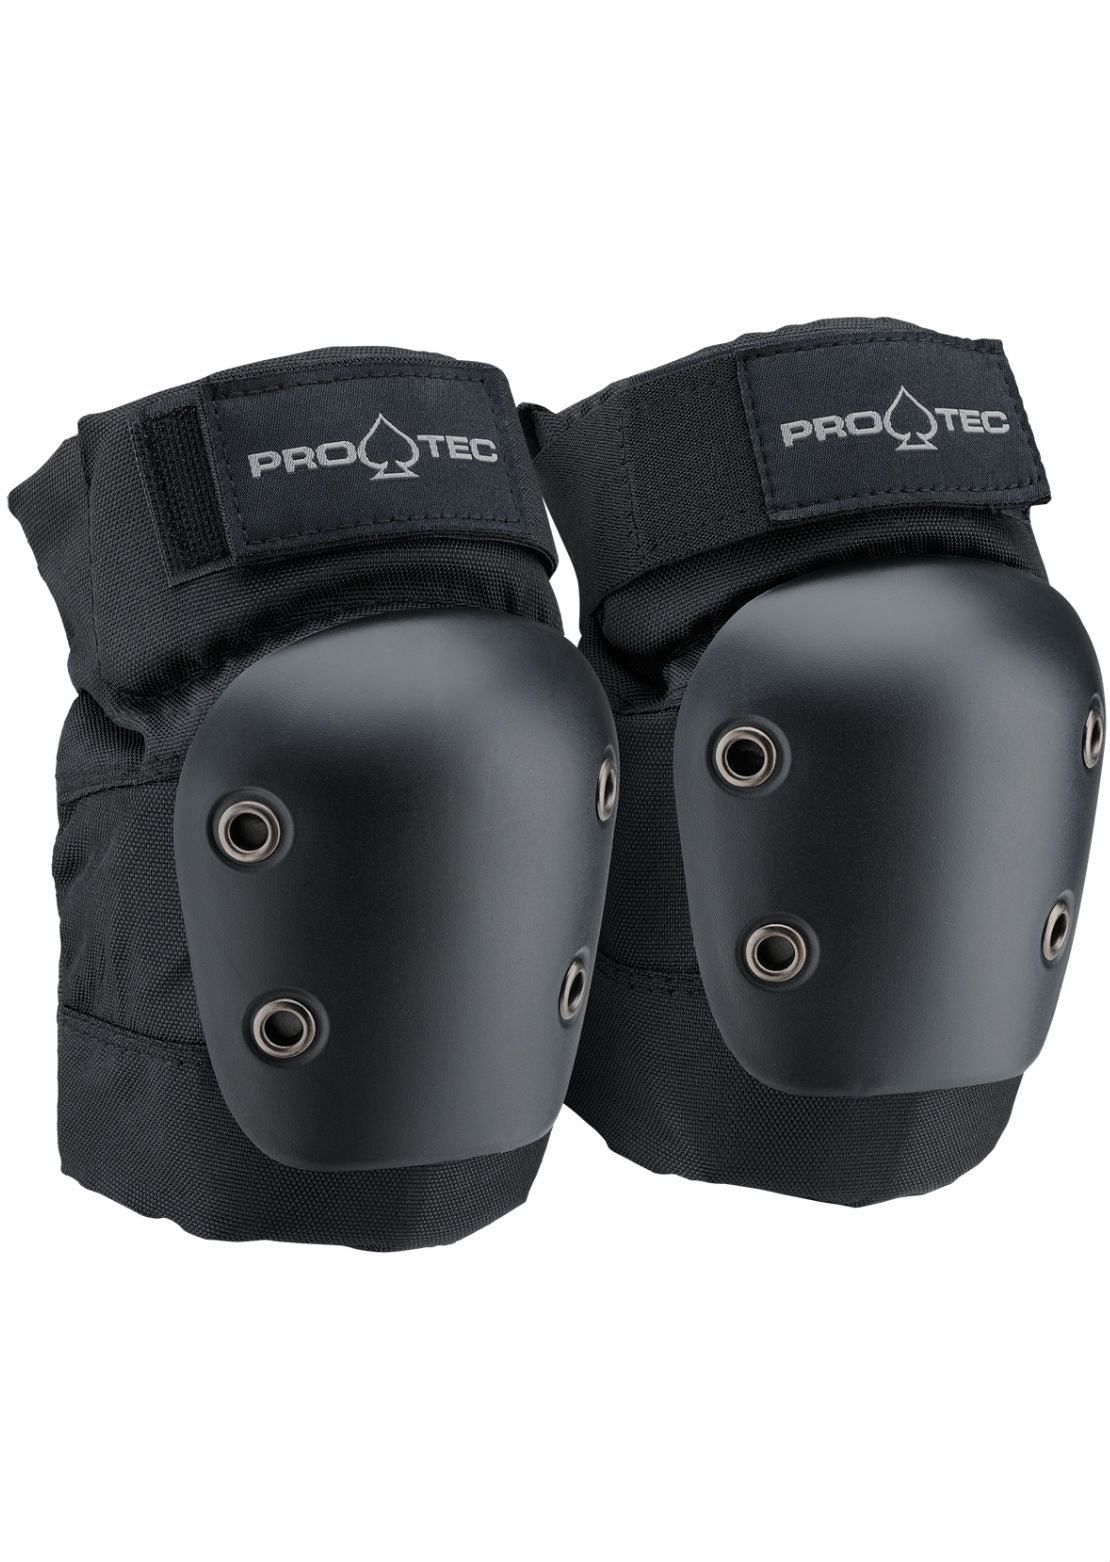 Pro-Tec Junior 3 Pack Pads Skateboard Protection